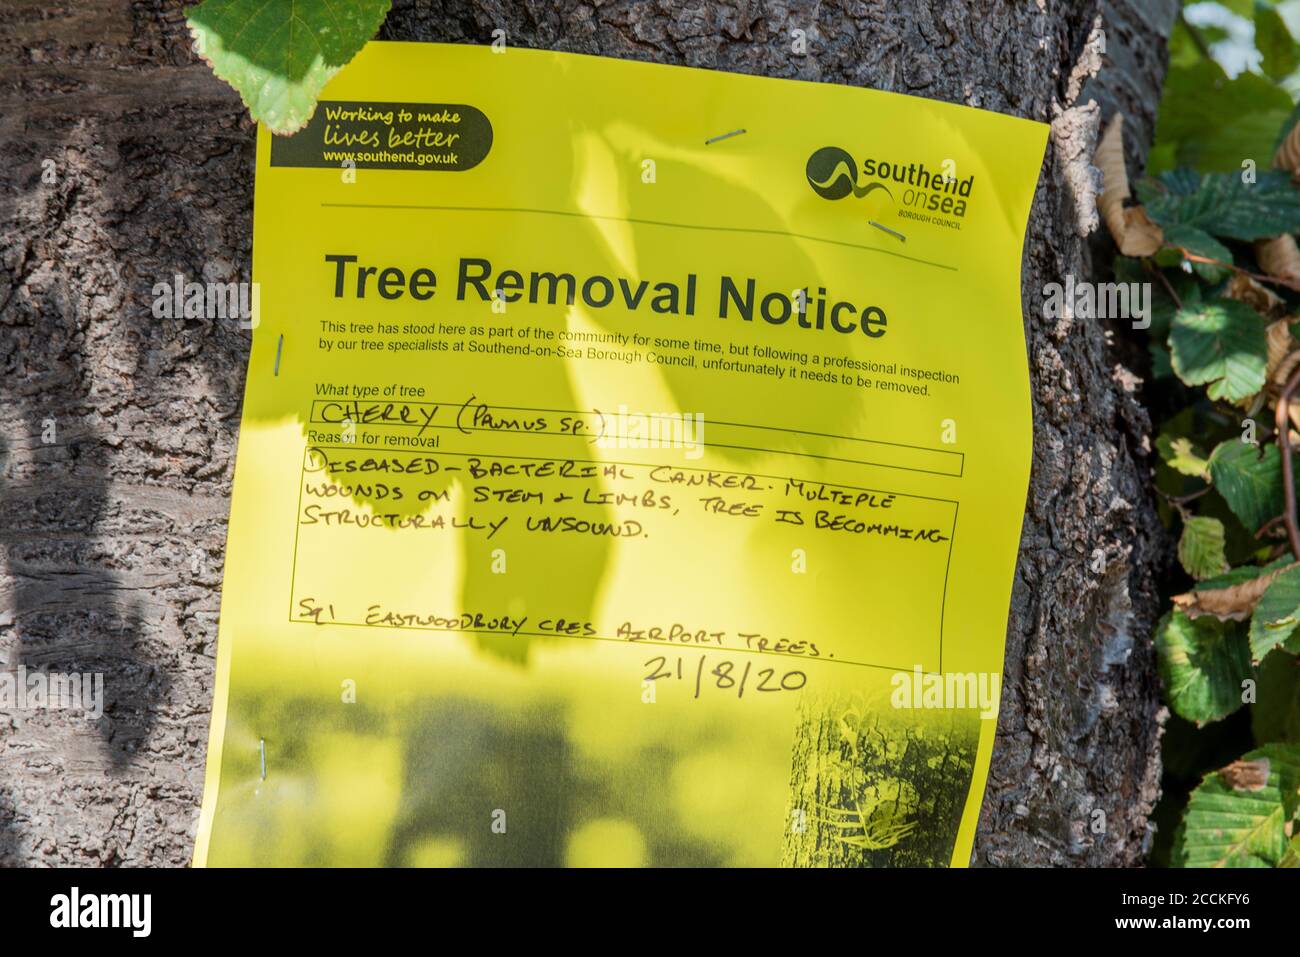 Tree removal notice sign attached to a tree in Southend on Sea, Essex, UK. Southend Borough Council, working to make lives better. Diseased canker Stock Photo